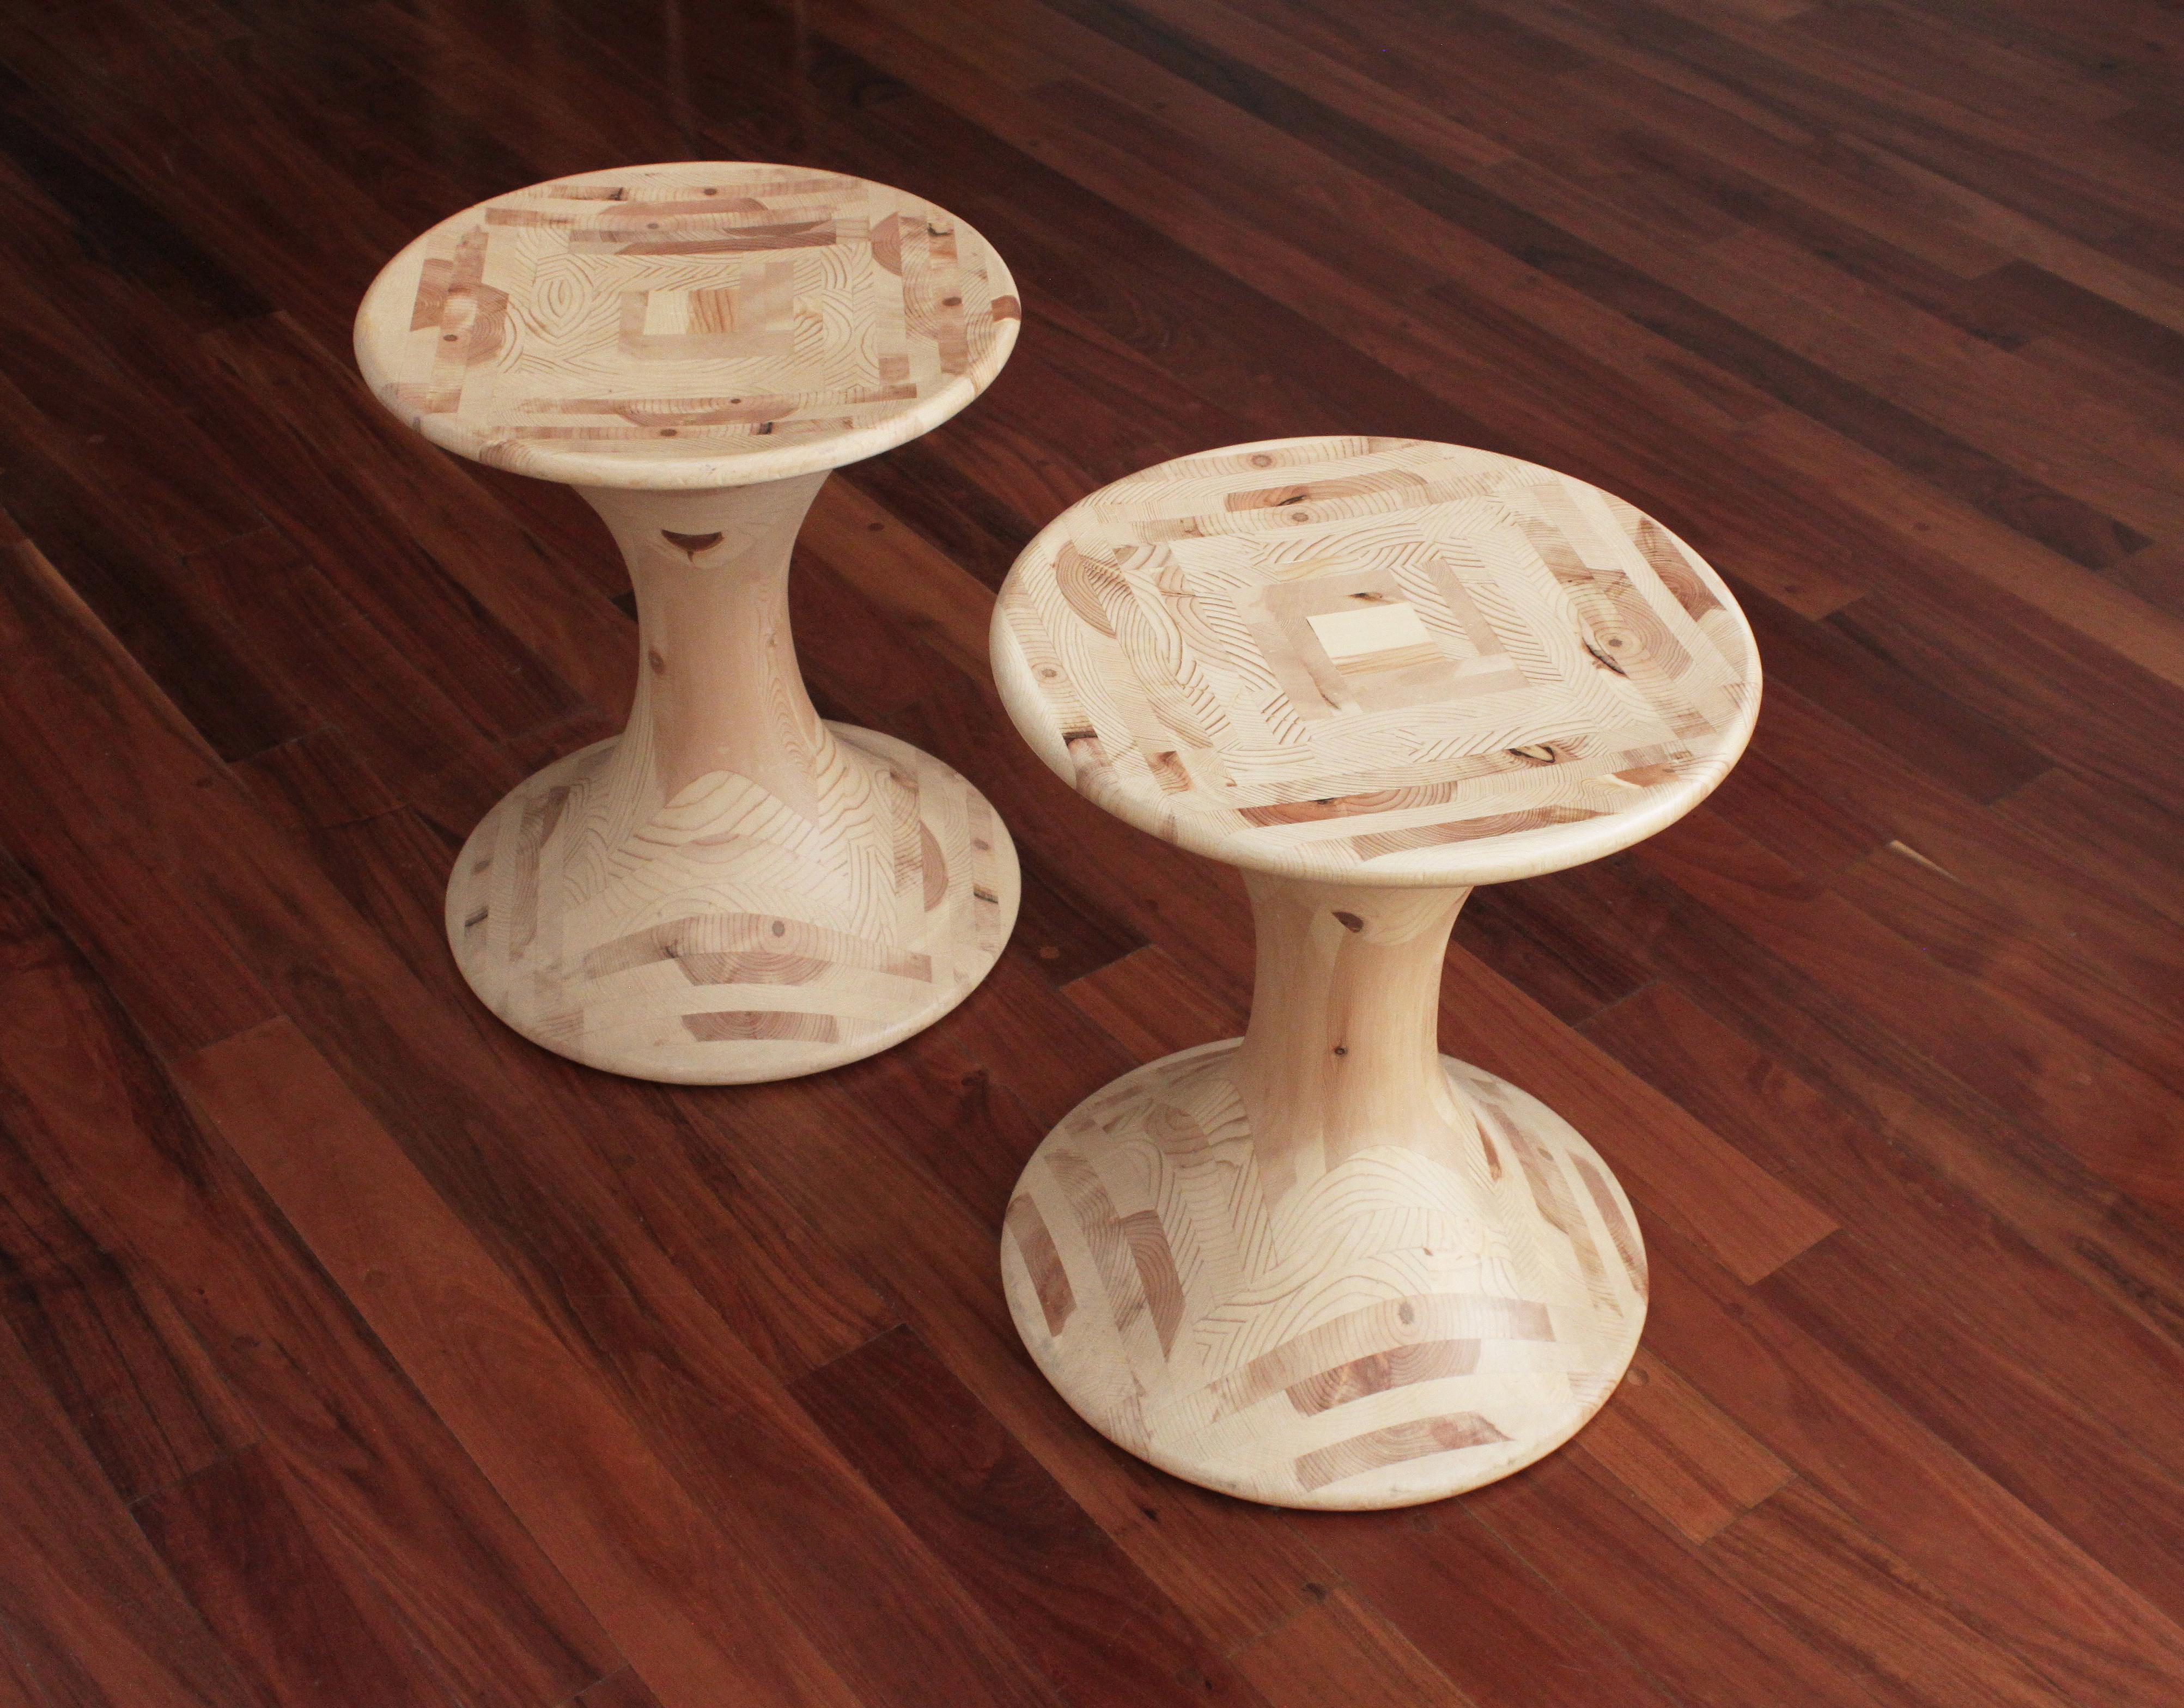 El Manzano Side Table and Stool, Maria Beckmann, Represented by Tuleste Factory 1